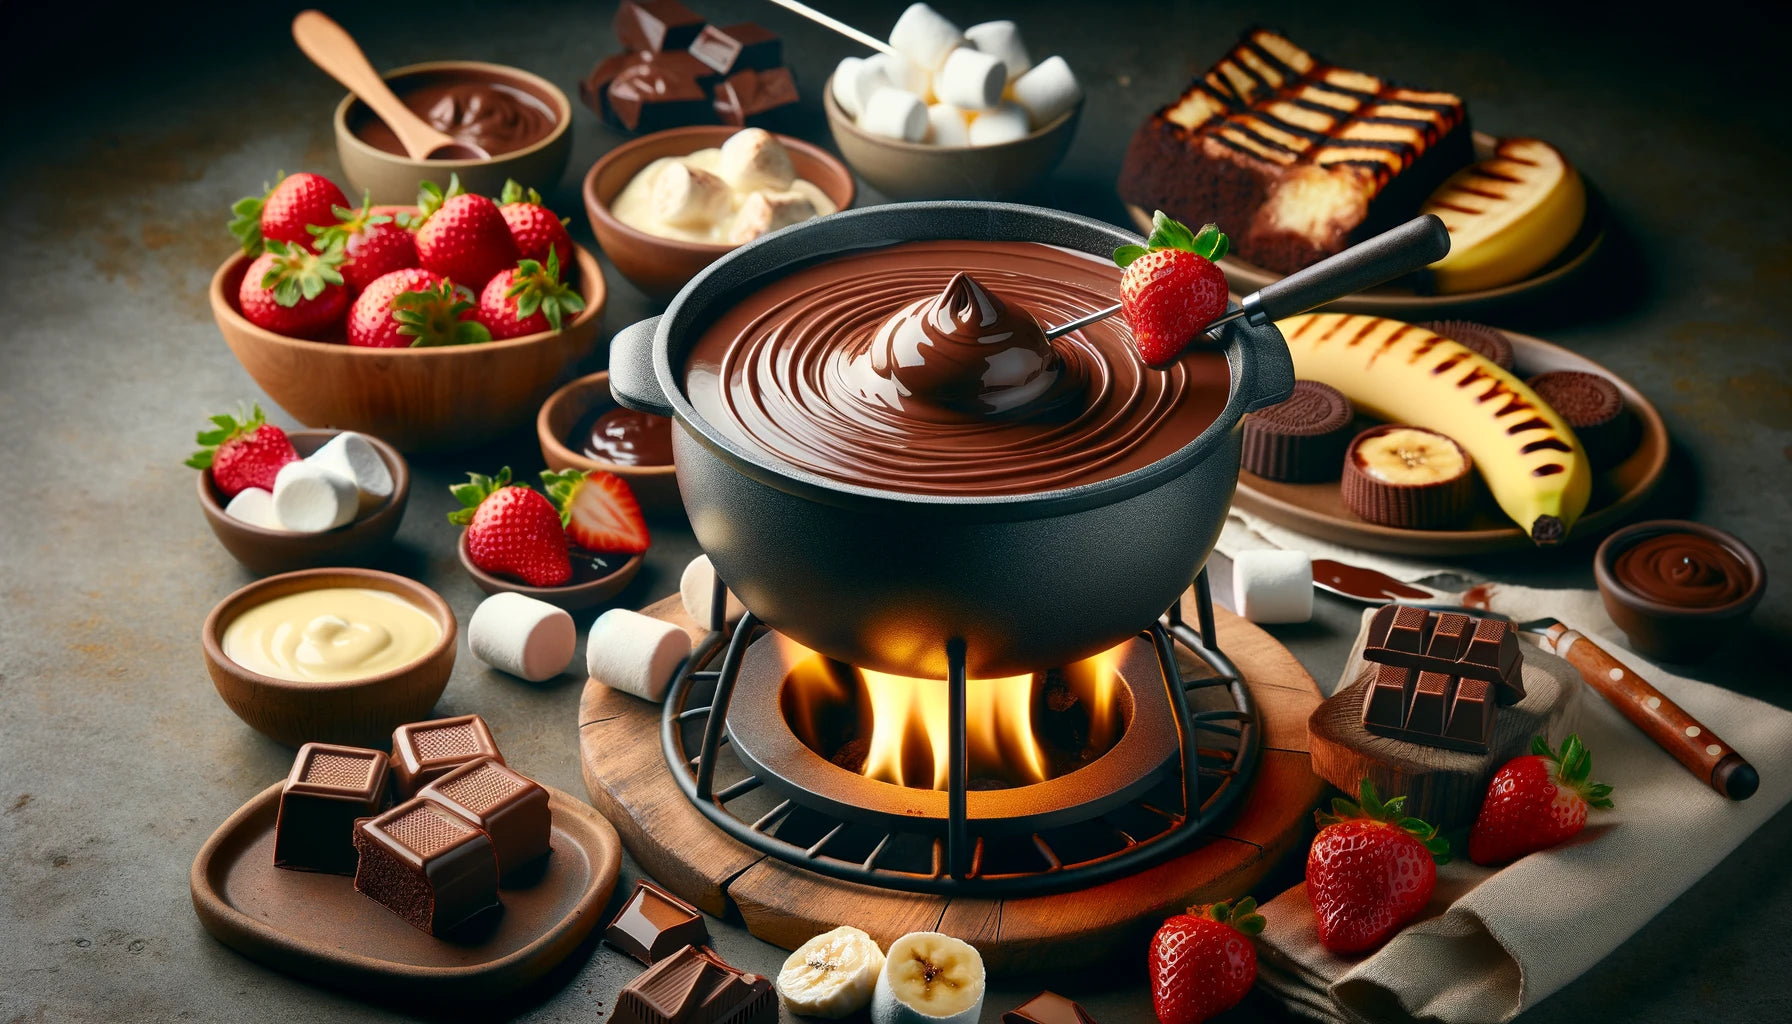 Grilled Easy Chocolate Fondue Recipe | Arteflame Grill Desserts